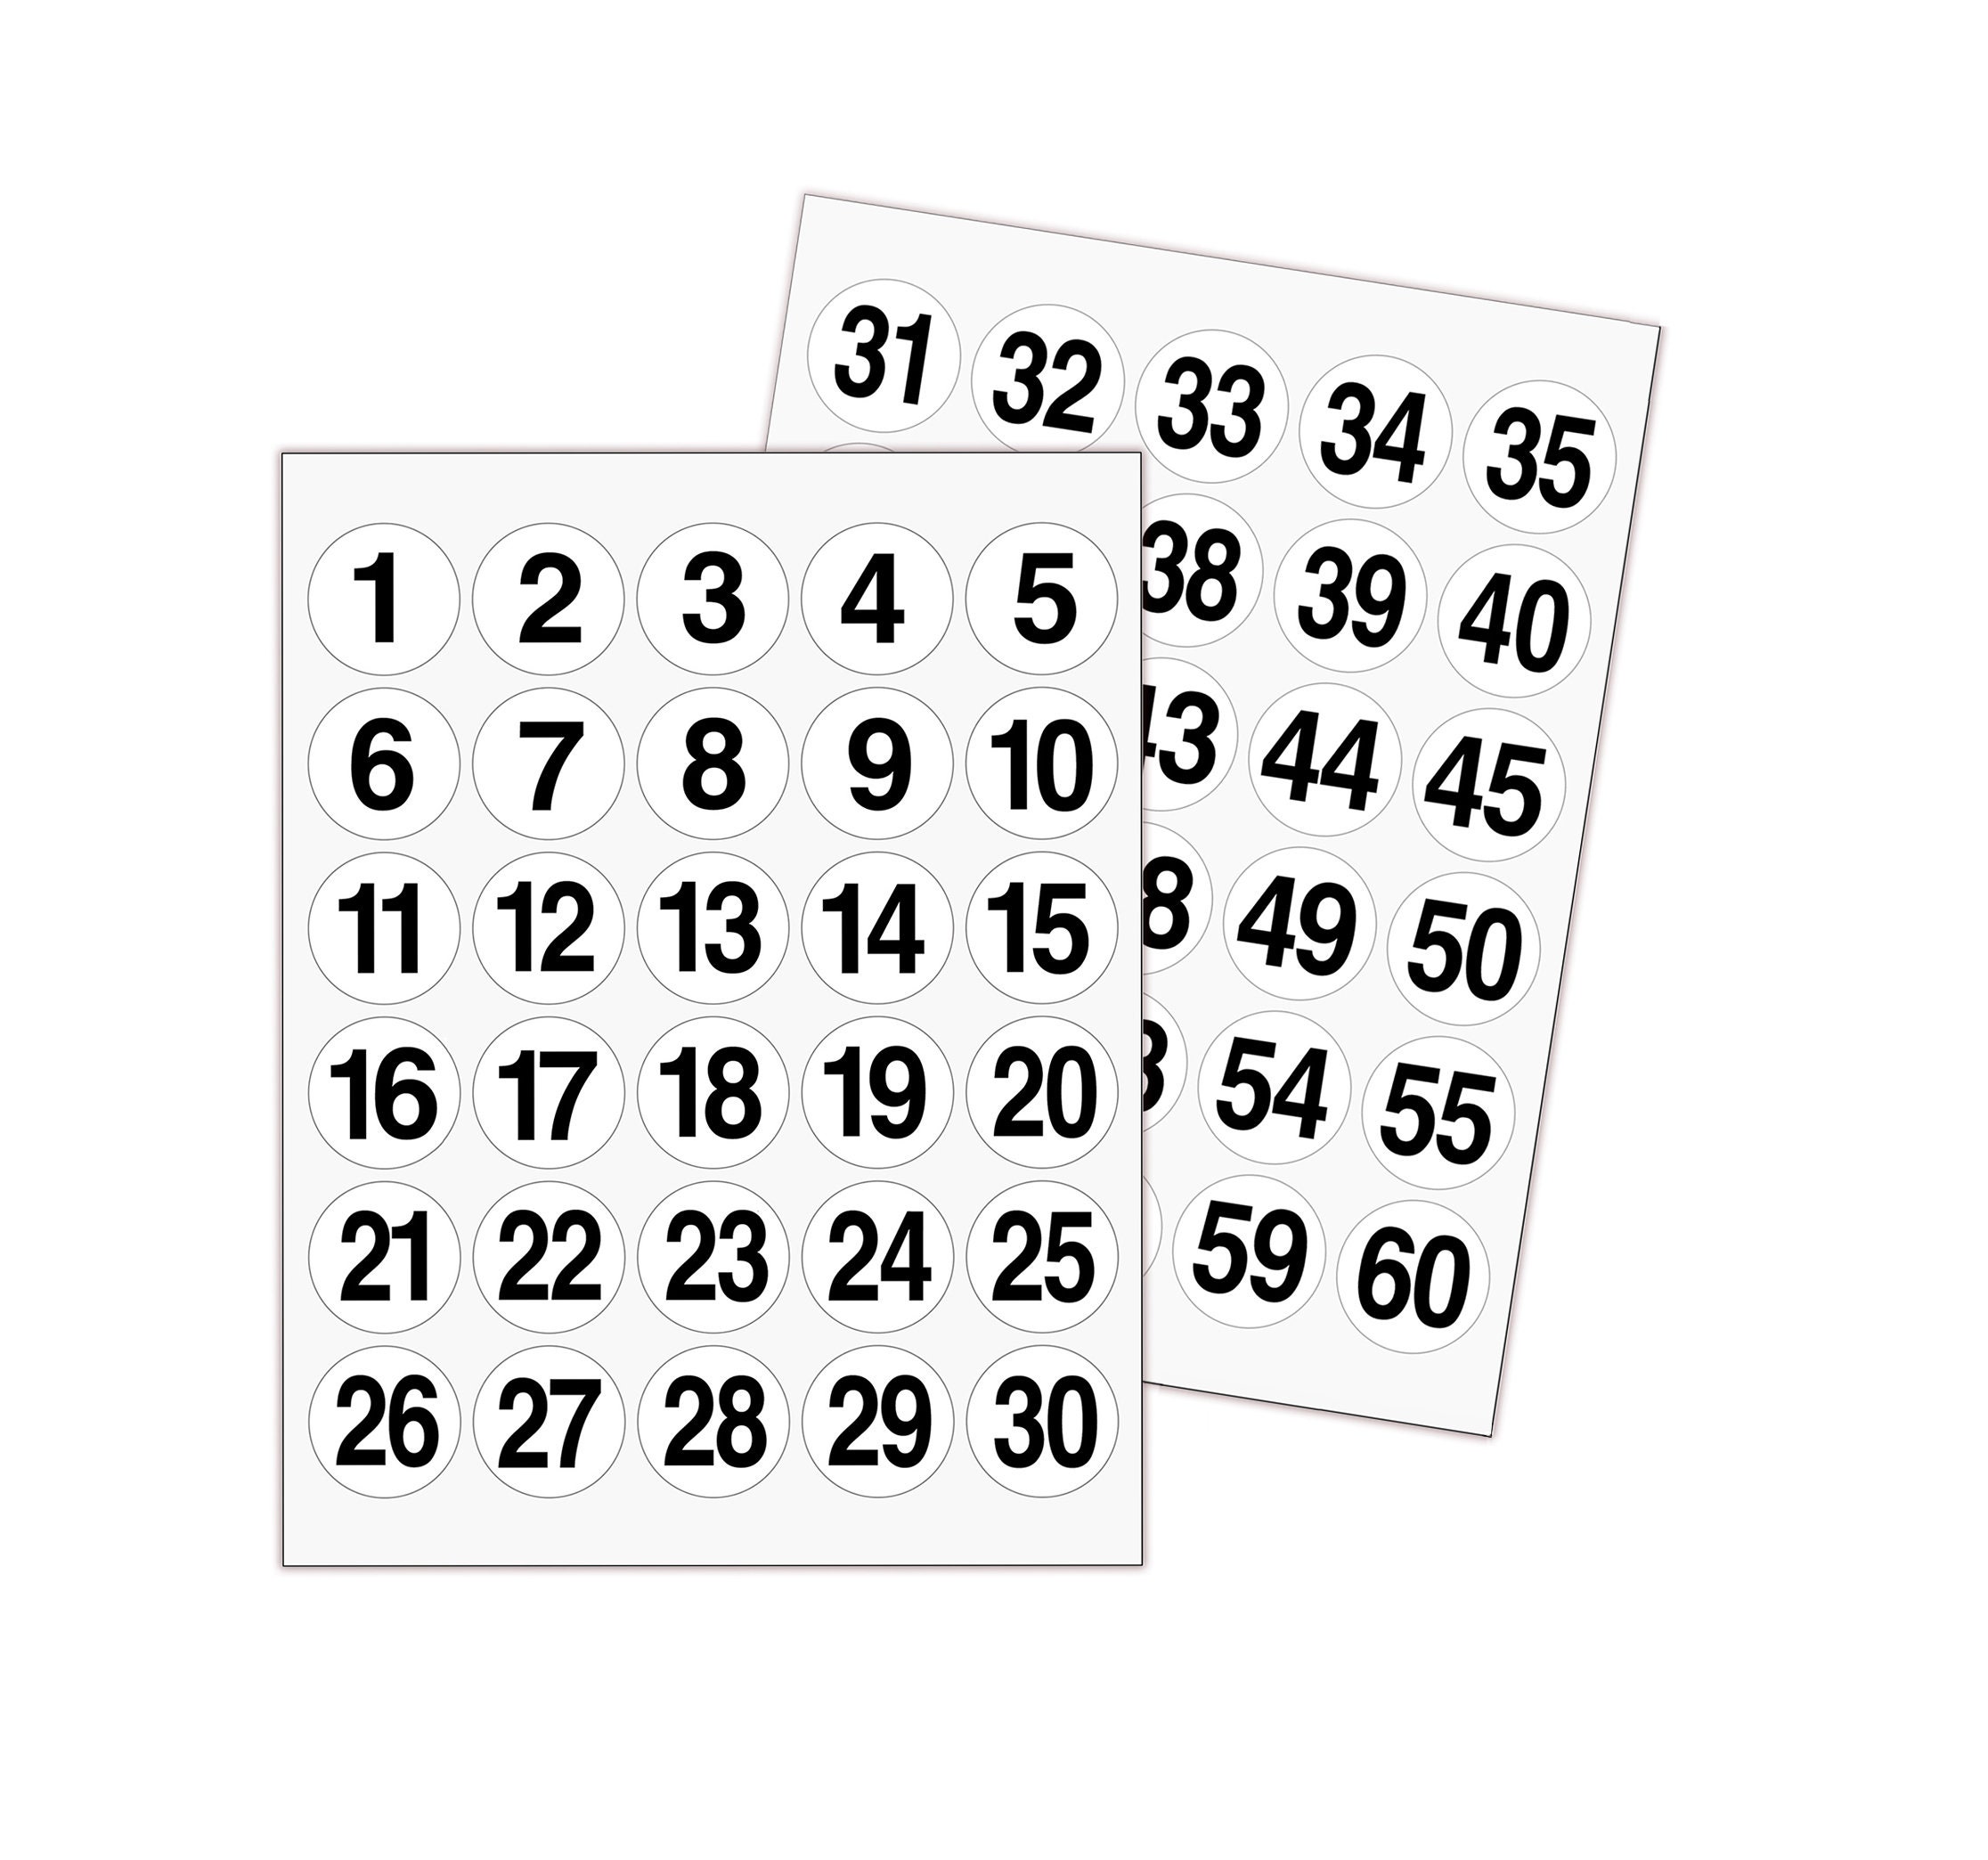 B olie Dicteren winnen NUMBERS 160 STICKERS Sequential 1-1/2 Circle Labels - Etsy